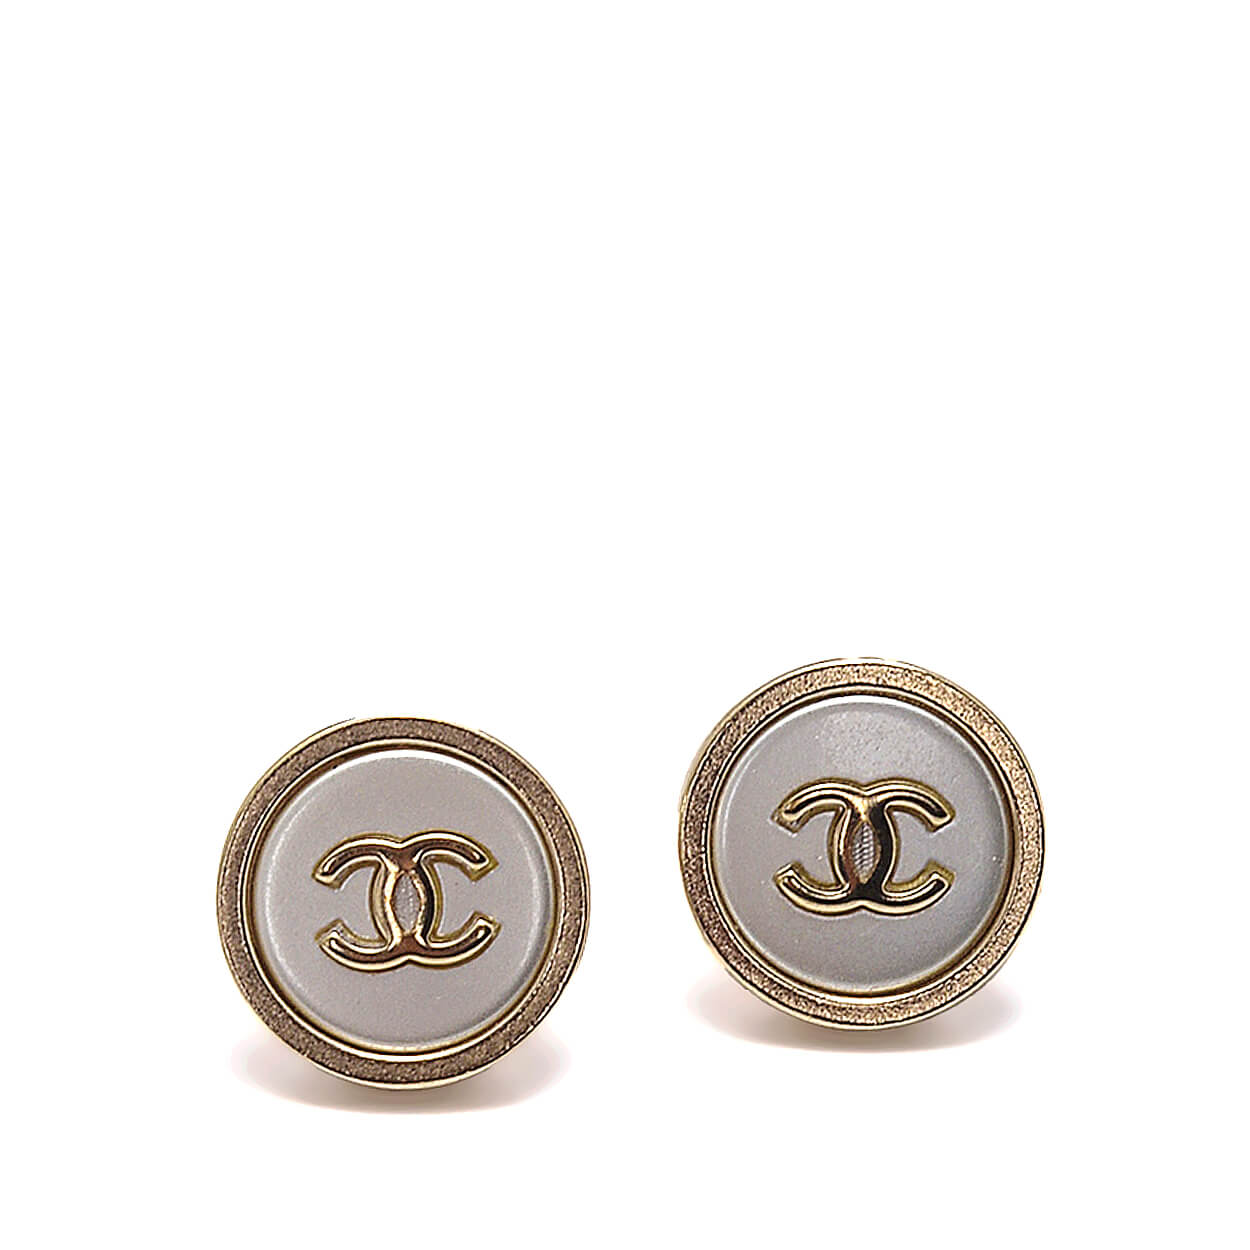 CHANEL - Gold & Silver Tone CC Round Earrings